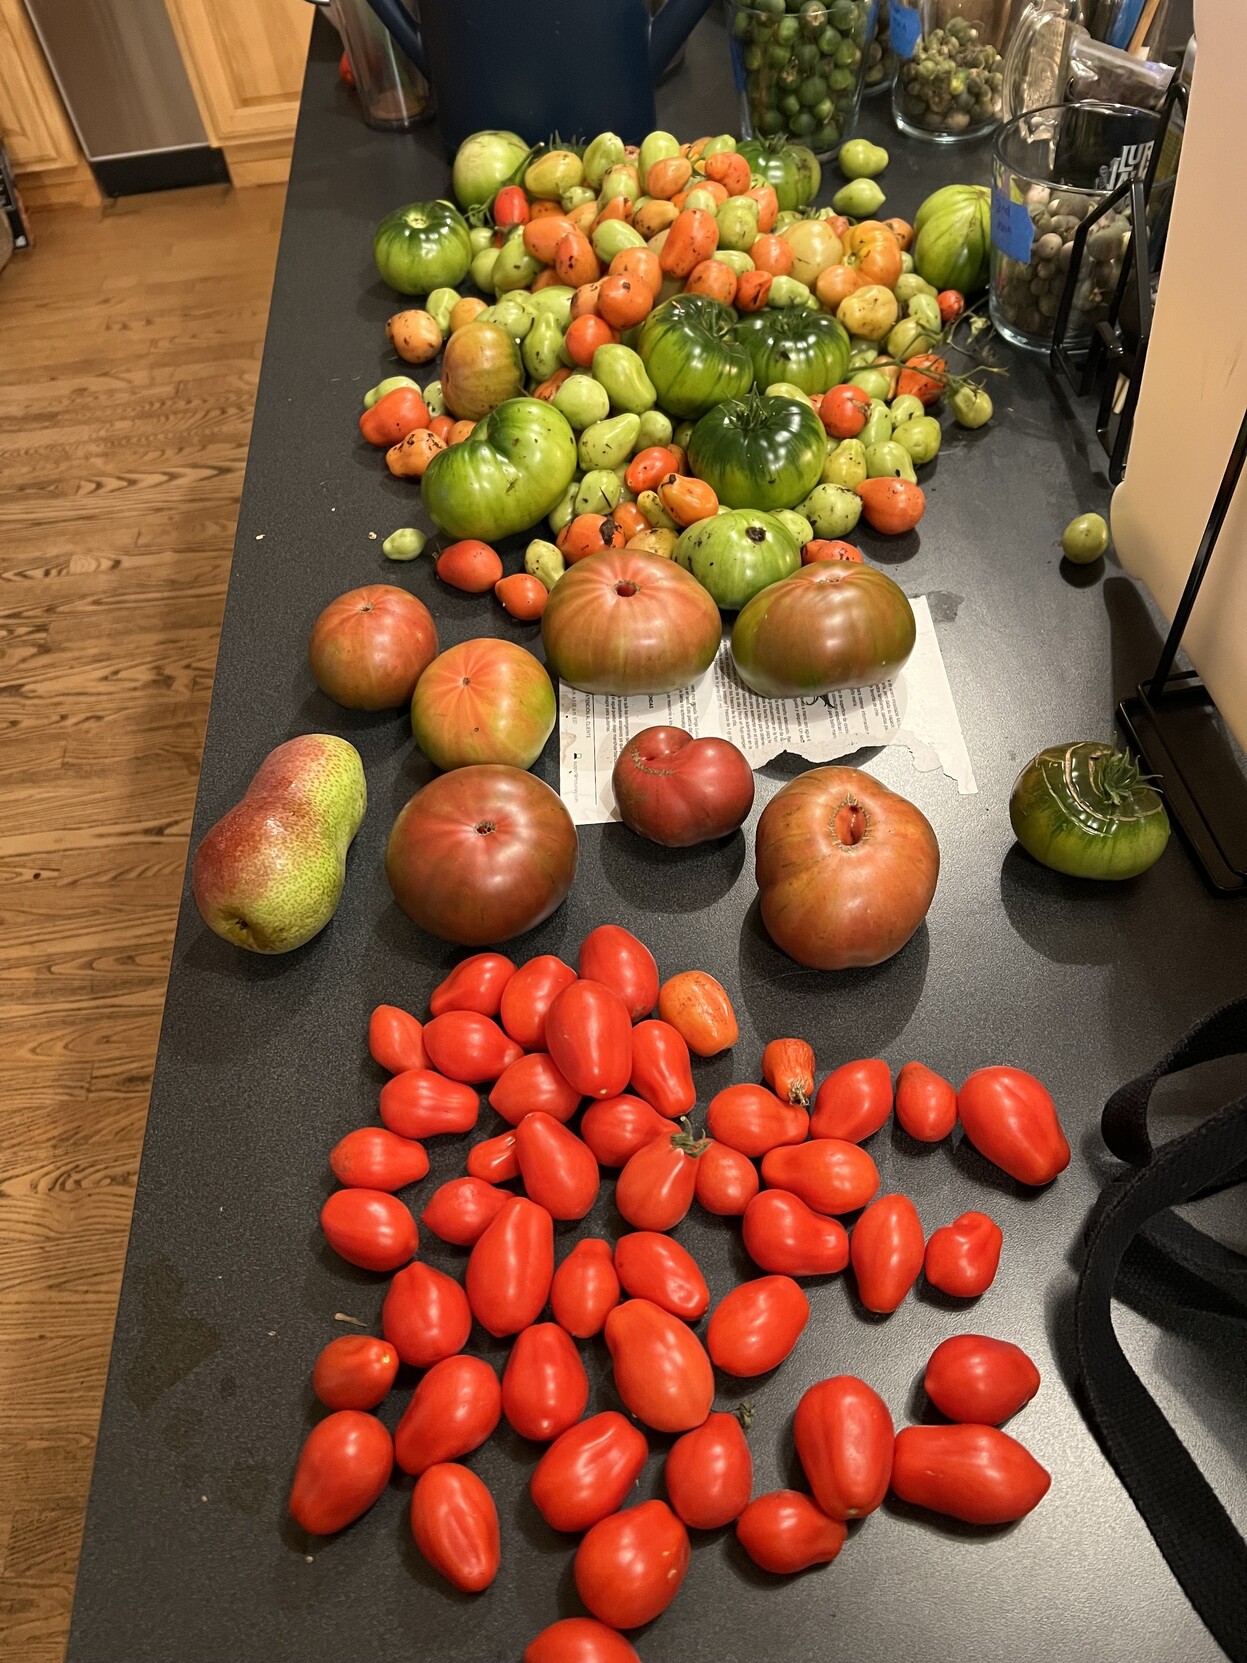 The counter is overrun with tomatoes again. This time the near end of the counter has a small single layer of beautifully red ripe Romas, then a few ripe Sokolades pink and purple heirlooms, one weirdly shaped pear, and finally a huge heap of mixed green, orange, and red Romas and Sokolades.  